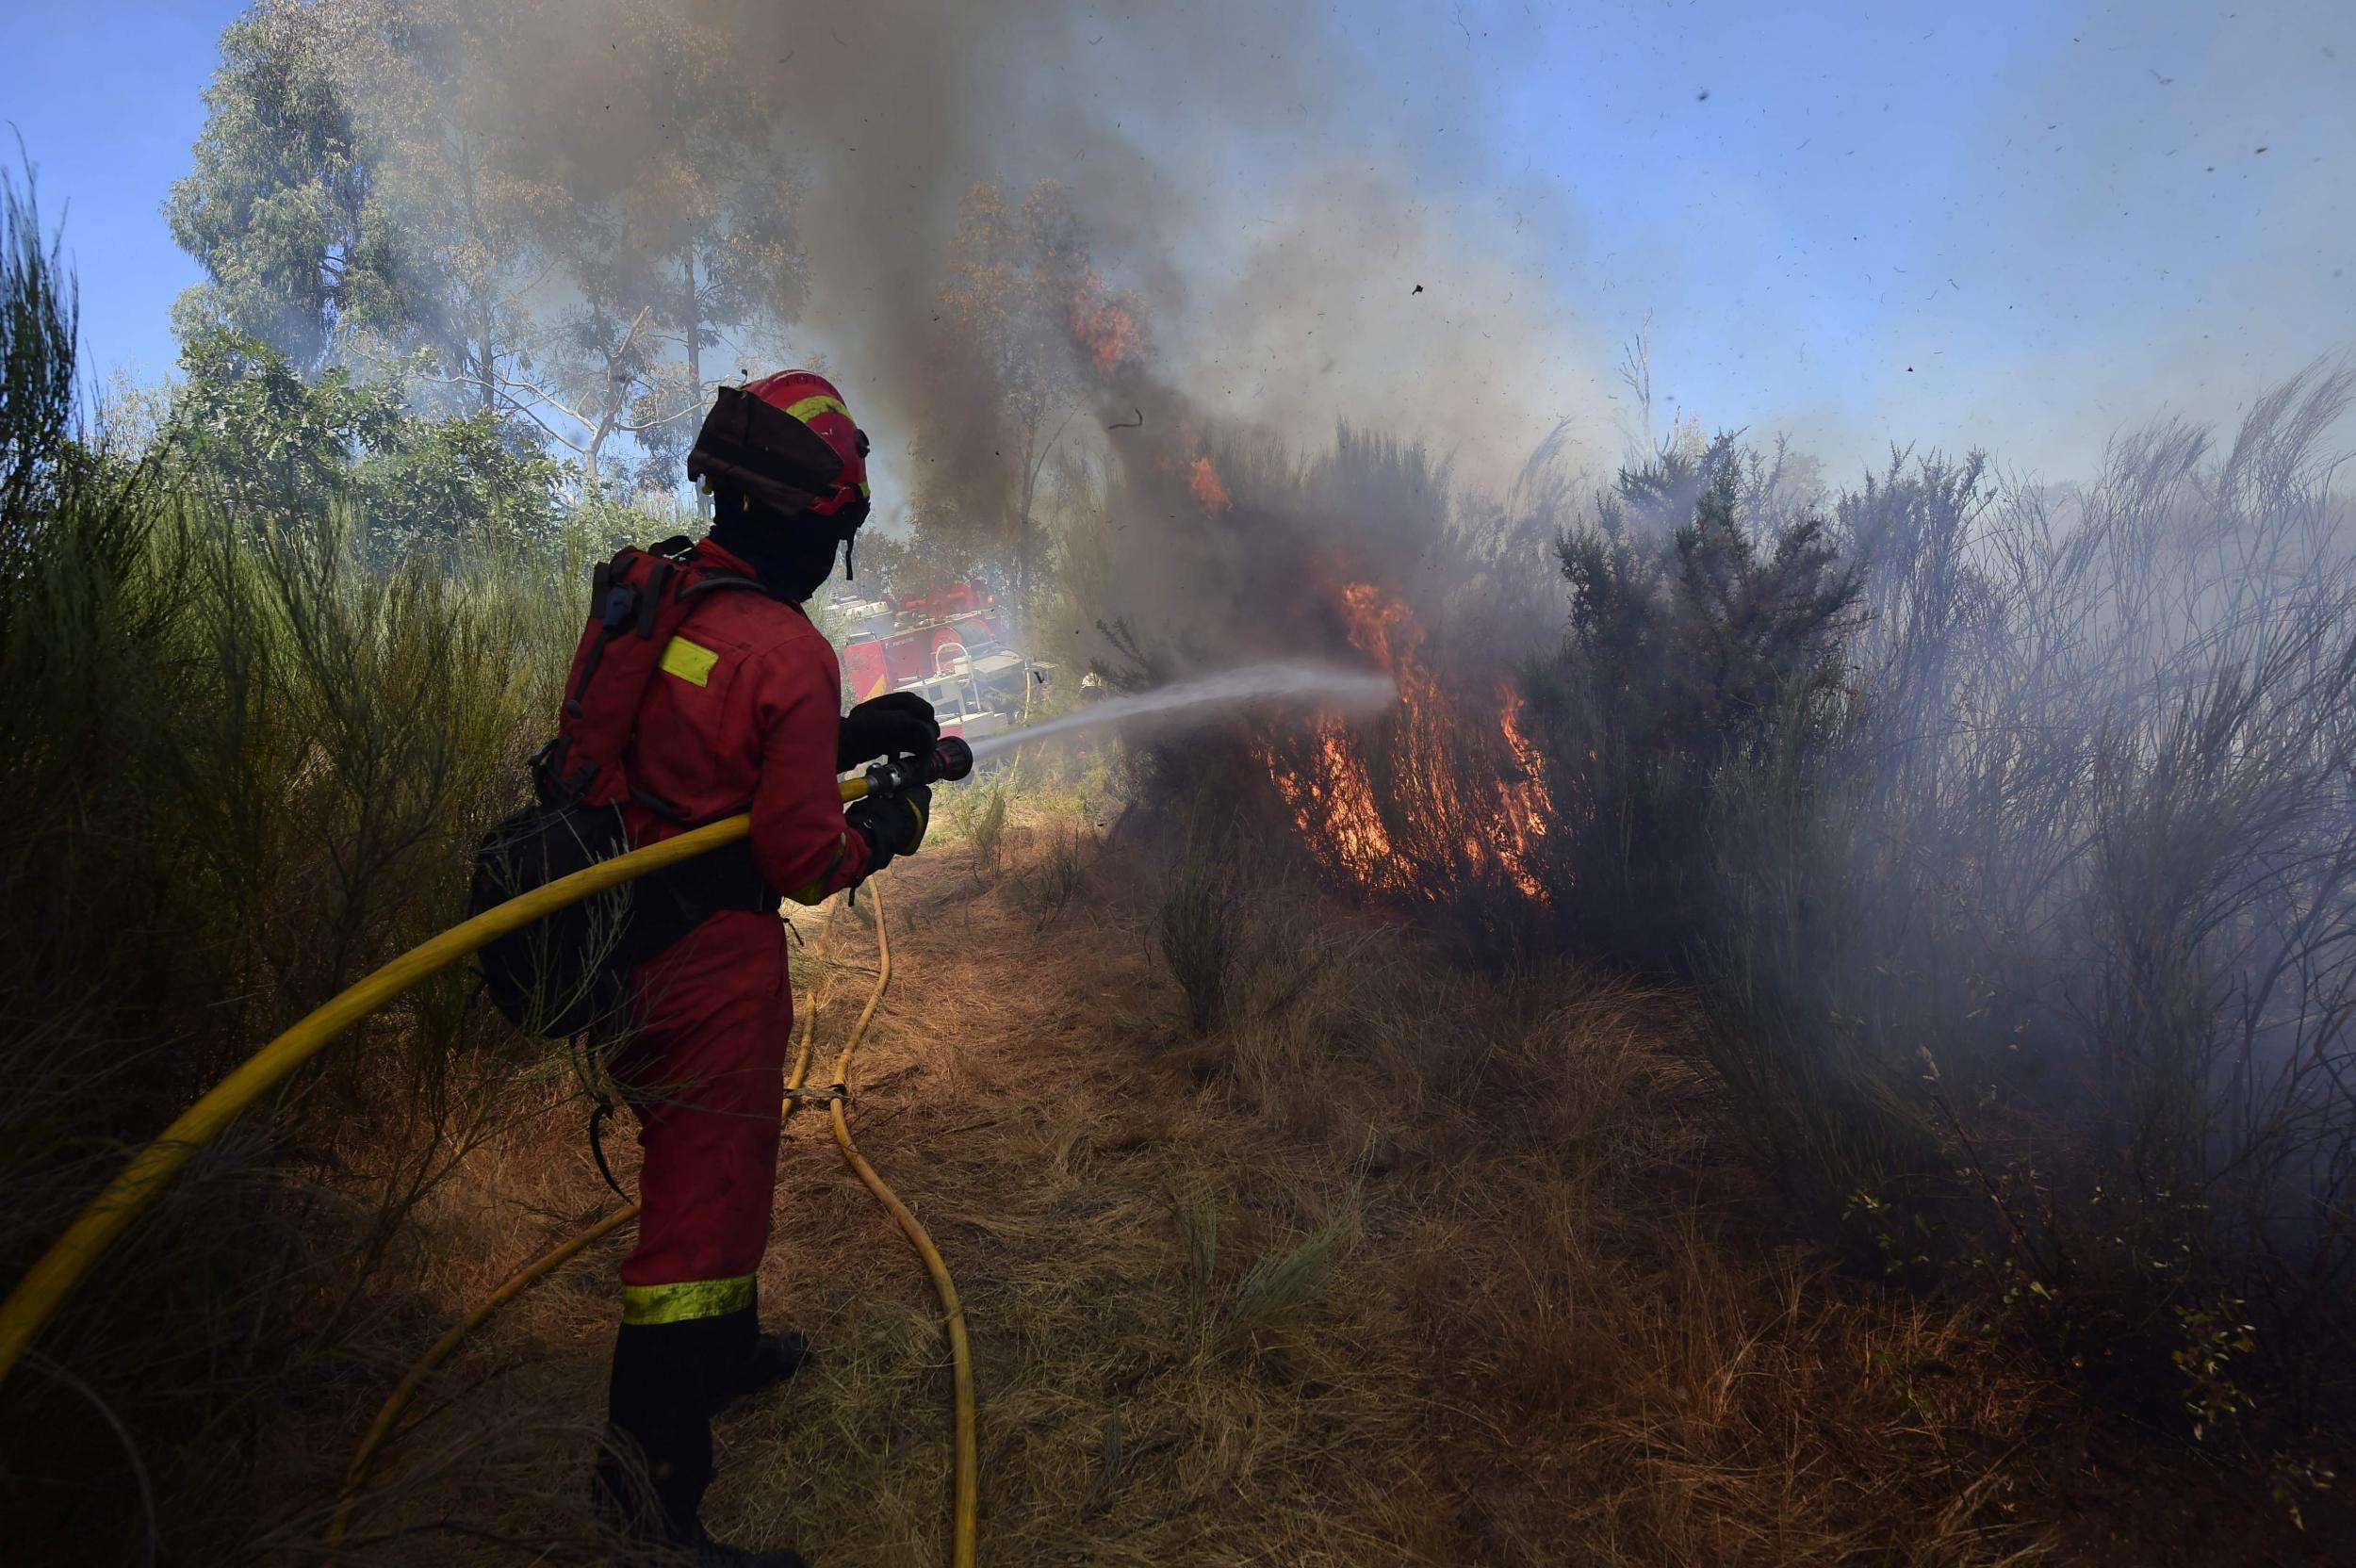 The recent heatwave in Europe has seen forest fires ravage Spain and other countries